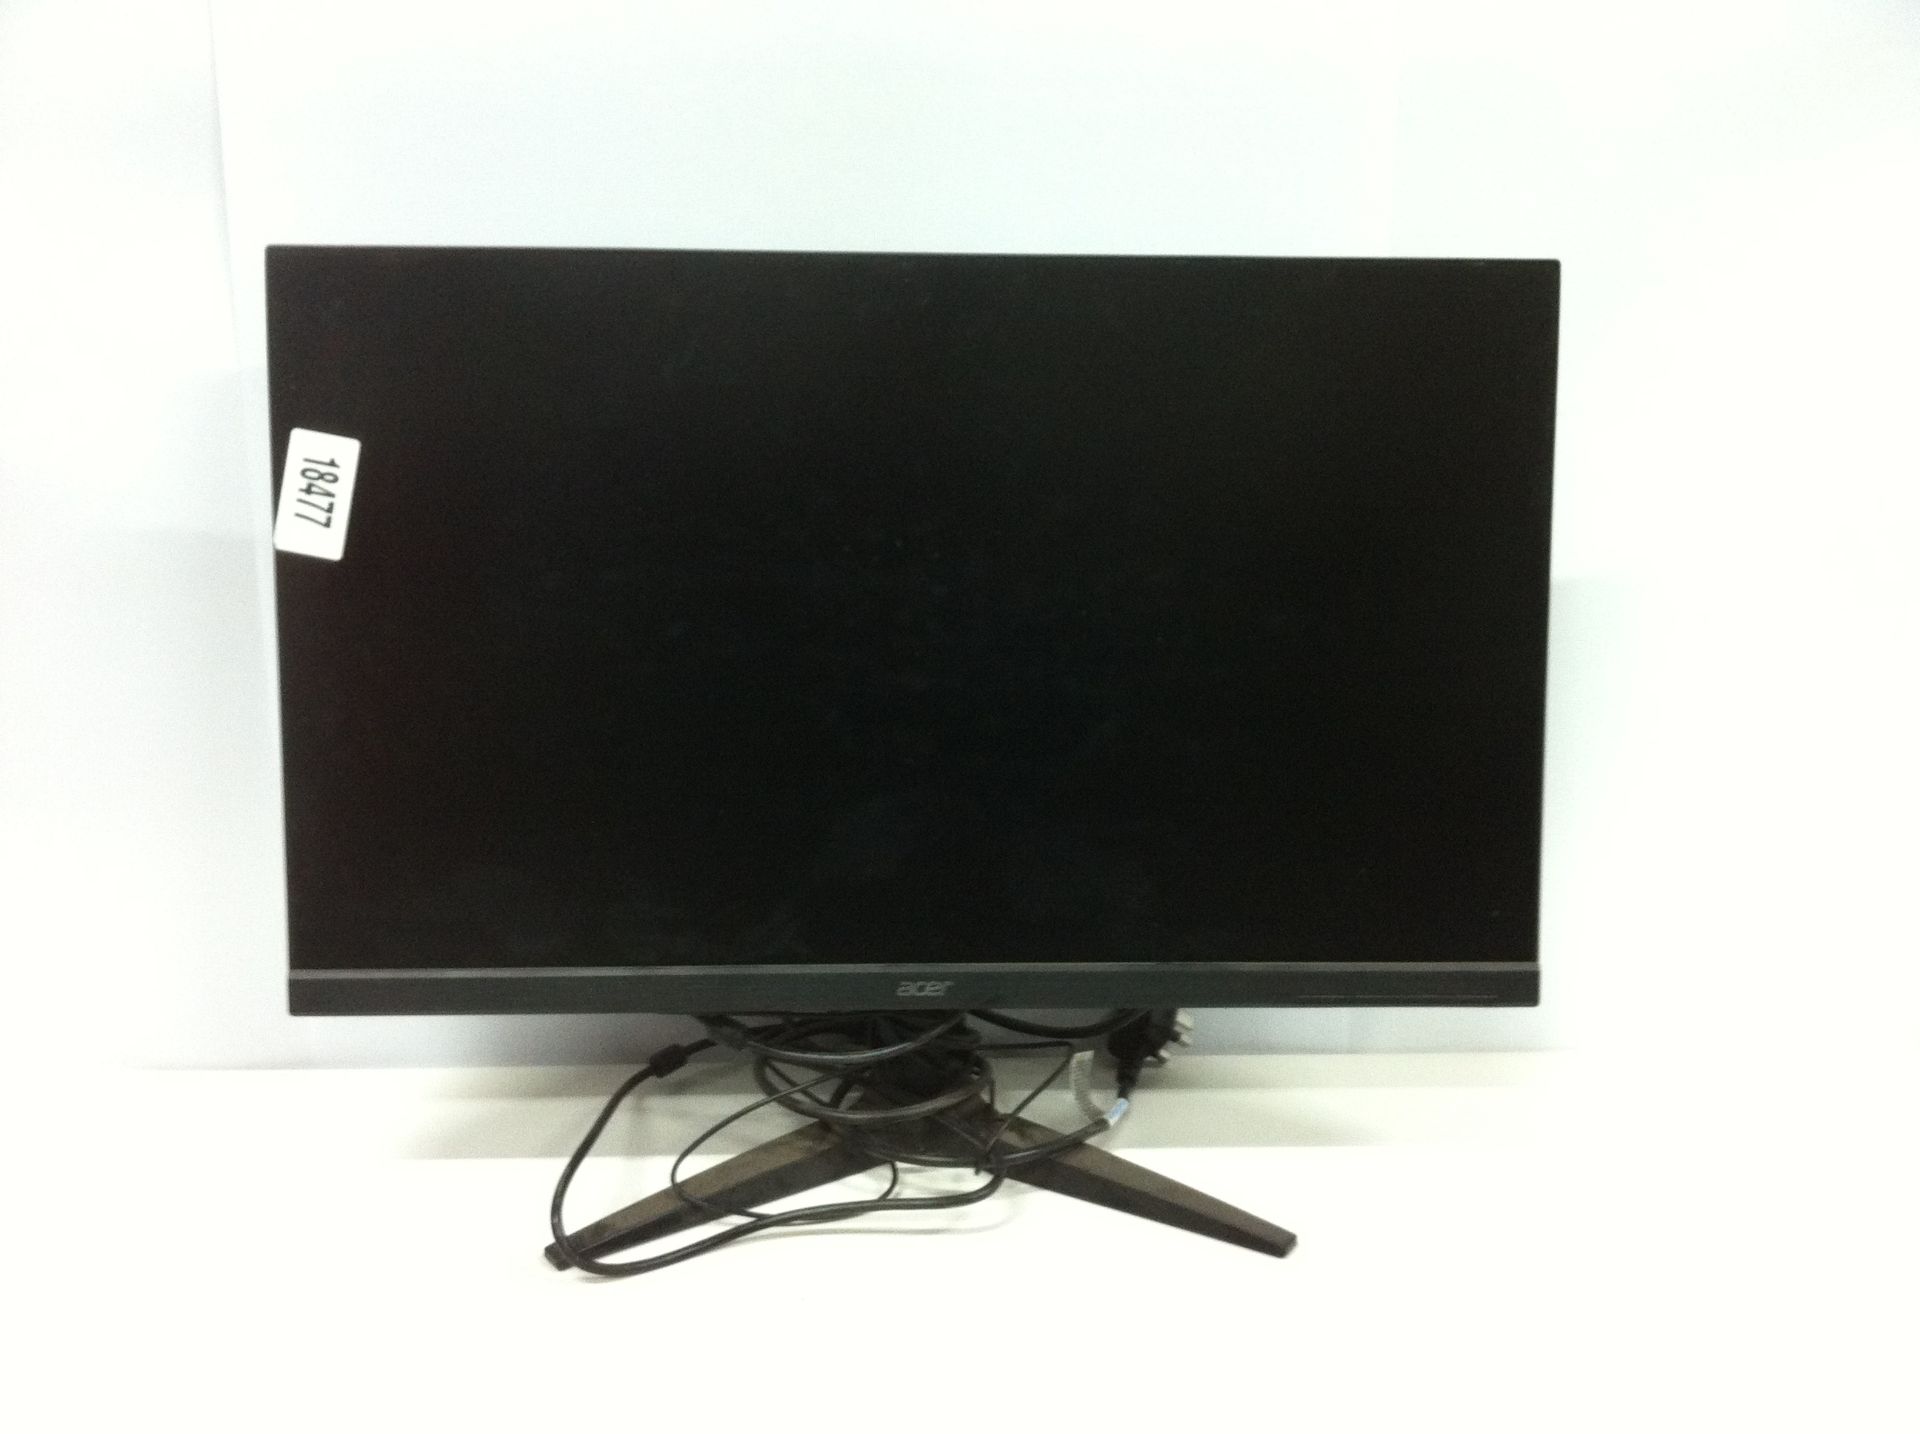 Acer KG271 27" LCD Computer Monitor